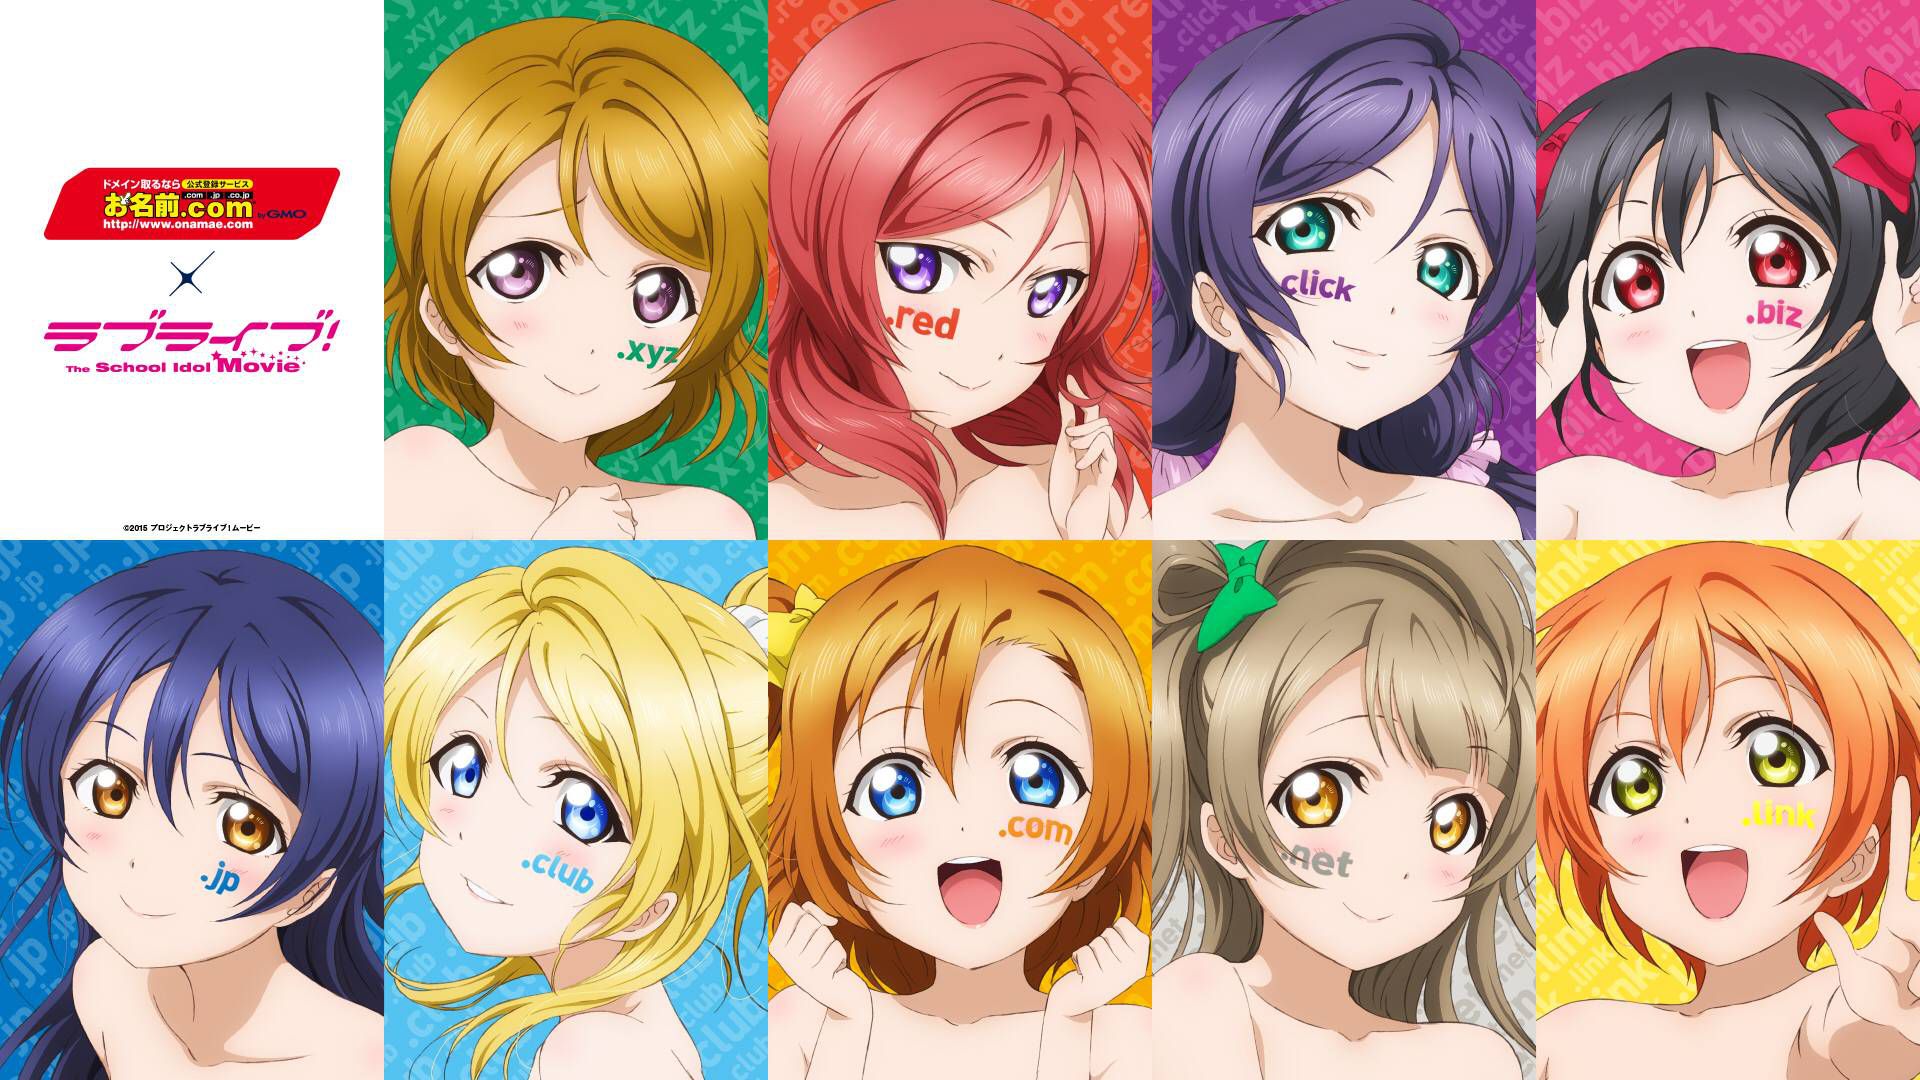 "Love live! '. Name.com collaboration with illustrations by a shirtless artificial mouth be from www 1